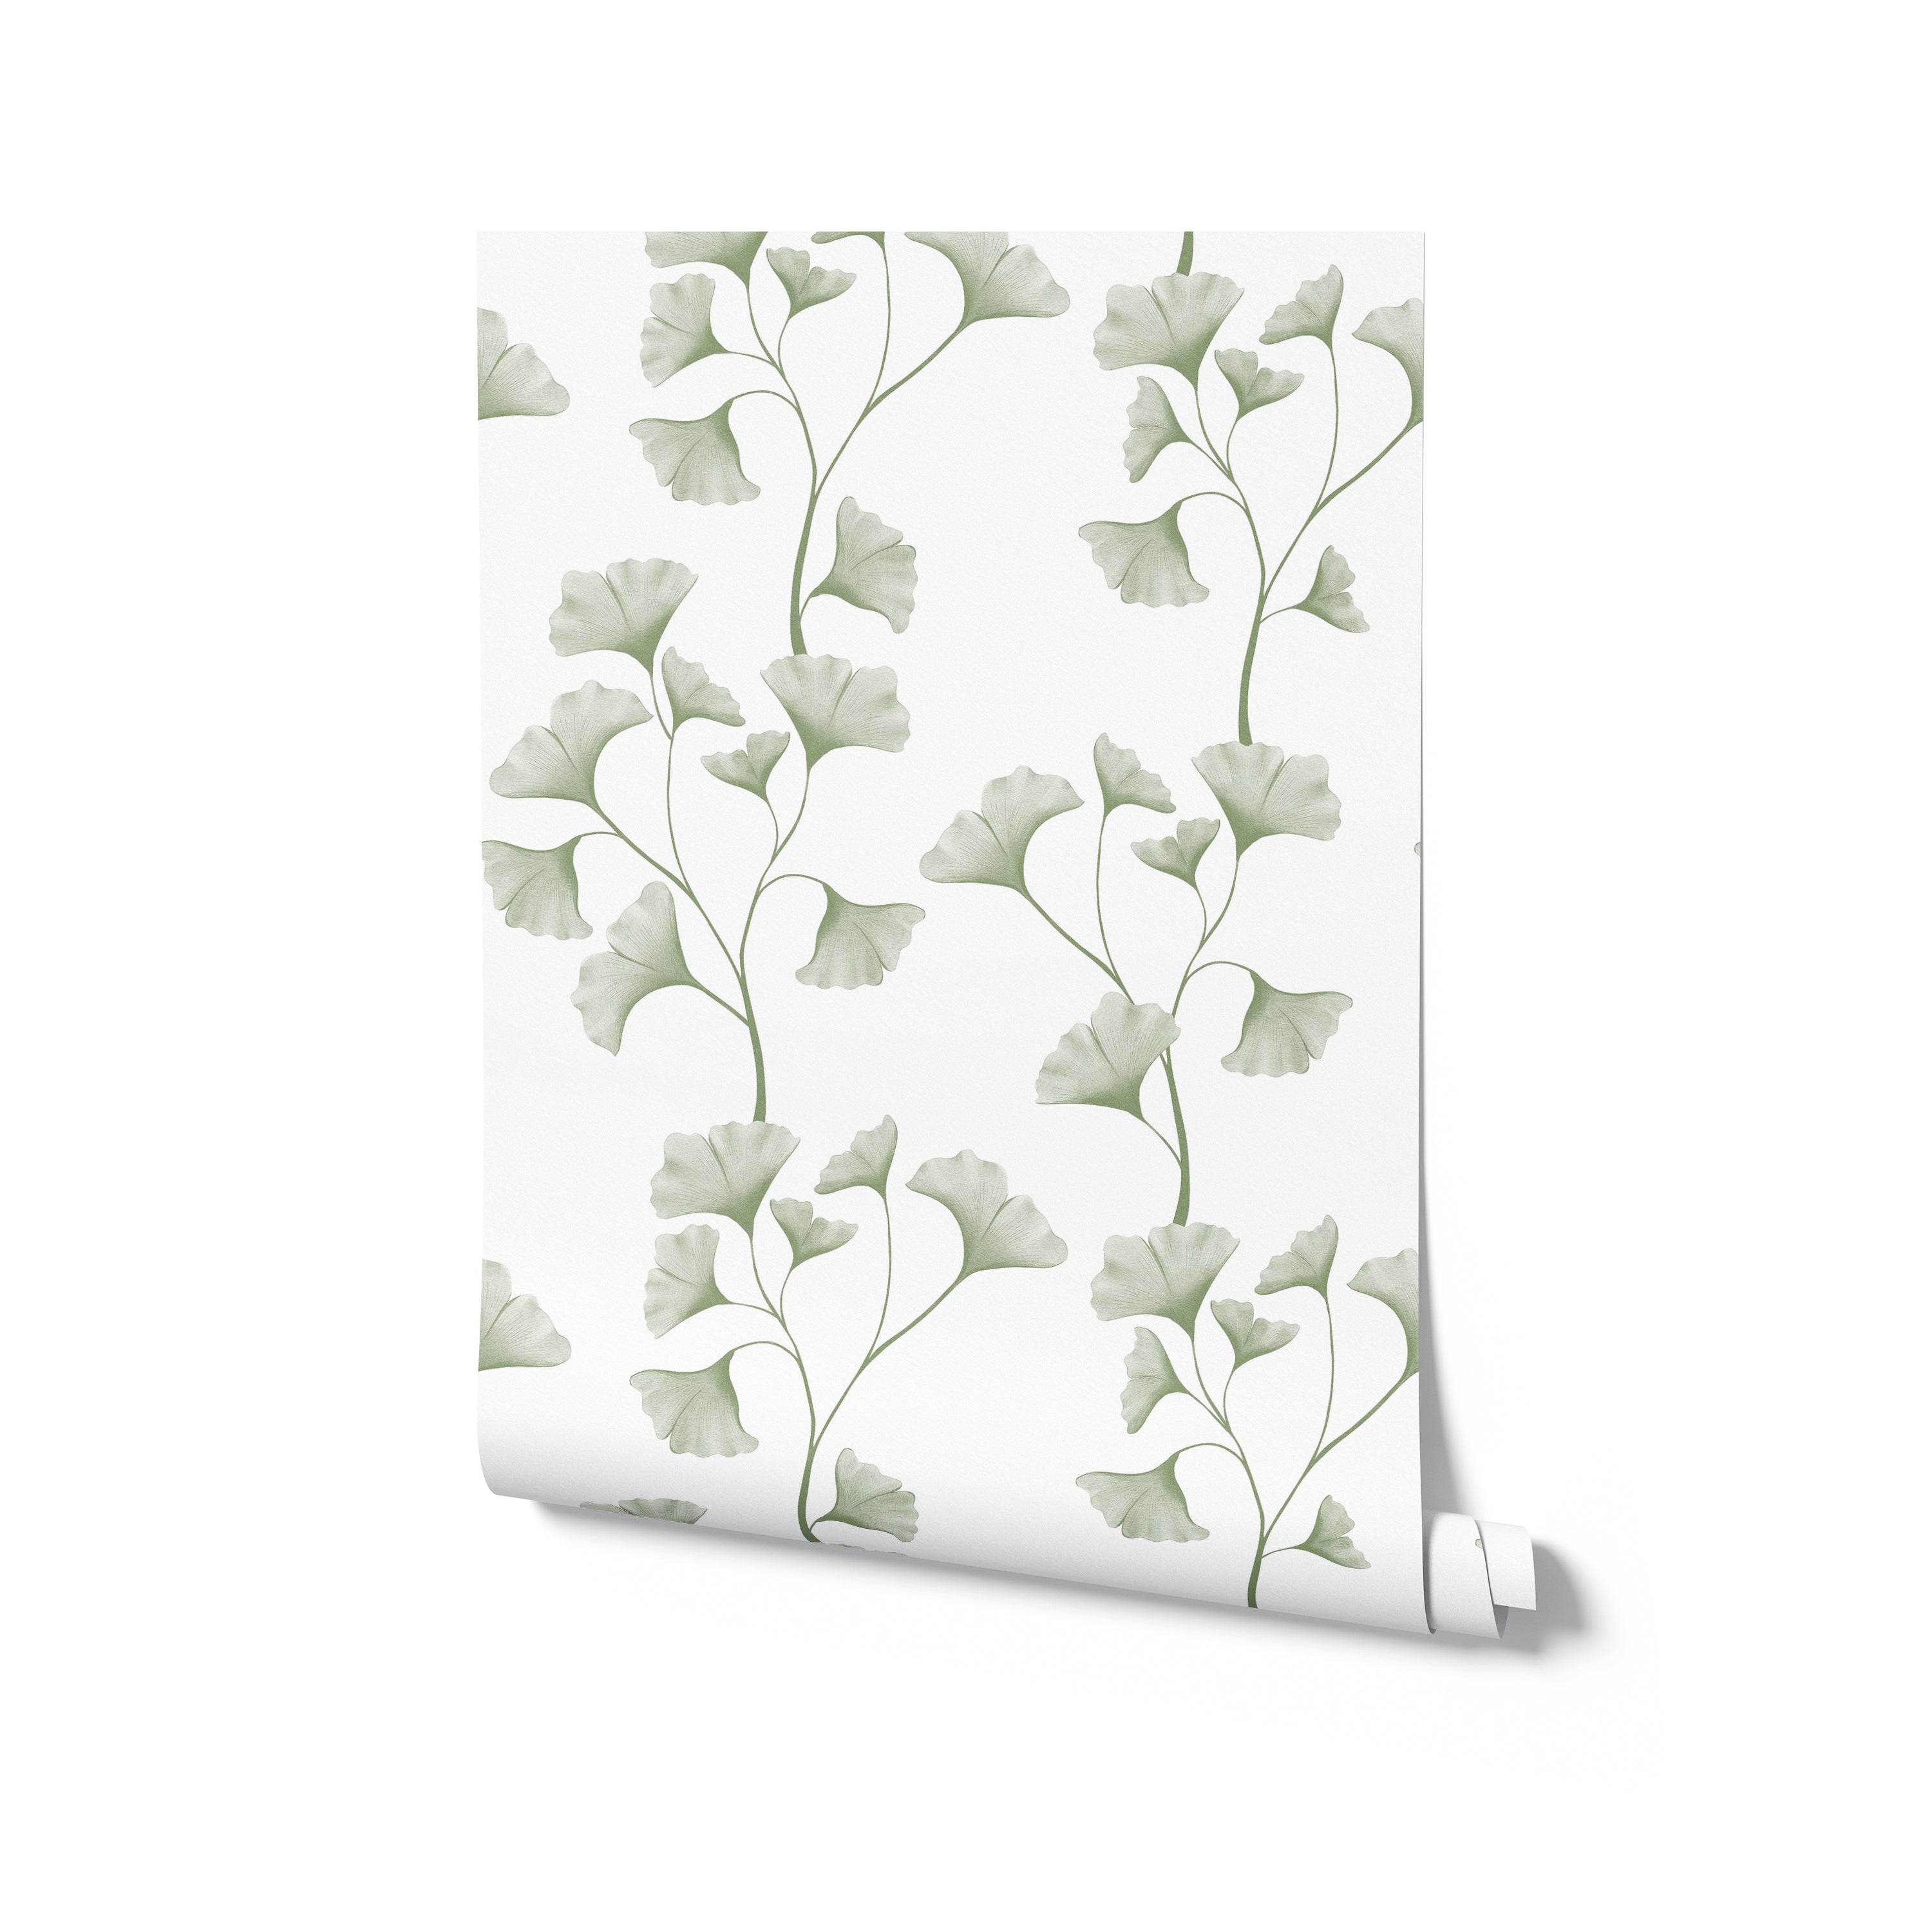 A roll of the Botanical Vines Wallpaper, illustrating the seamless pattern of green vine leaves on a crisp white background. The design flows gracefully, creating a sense of tranquility and elegance, ideal for enhancing any living space with a touch of nature